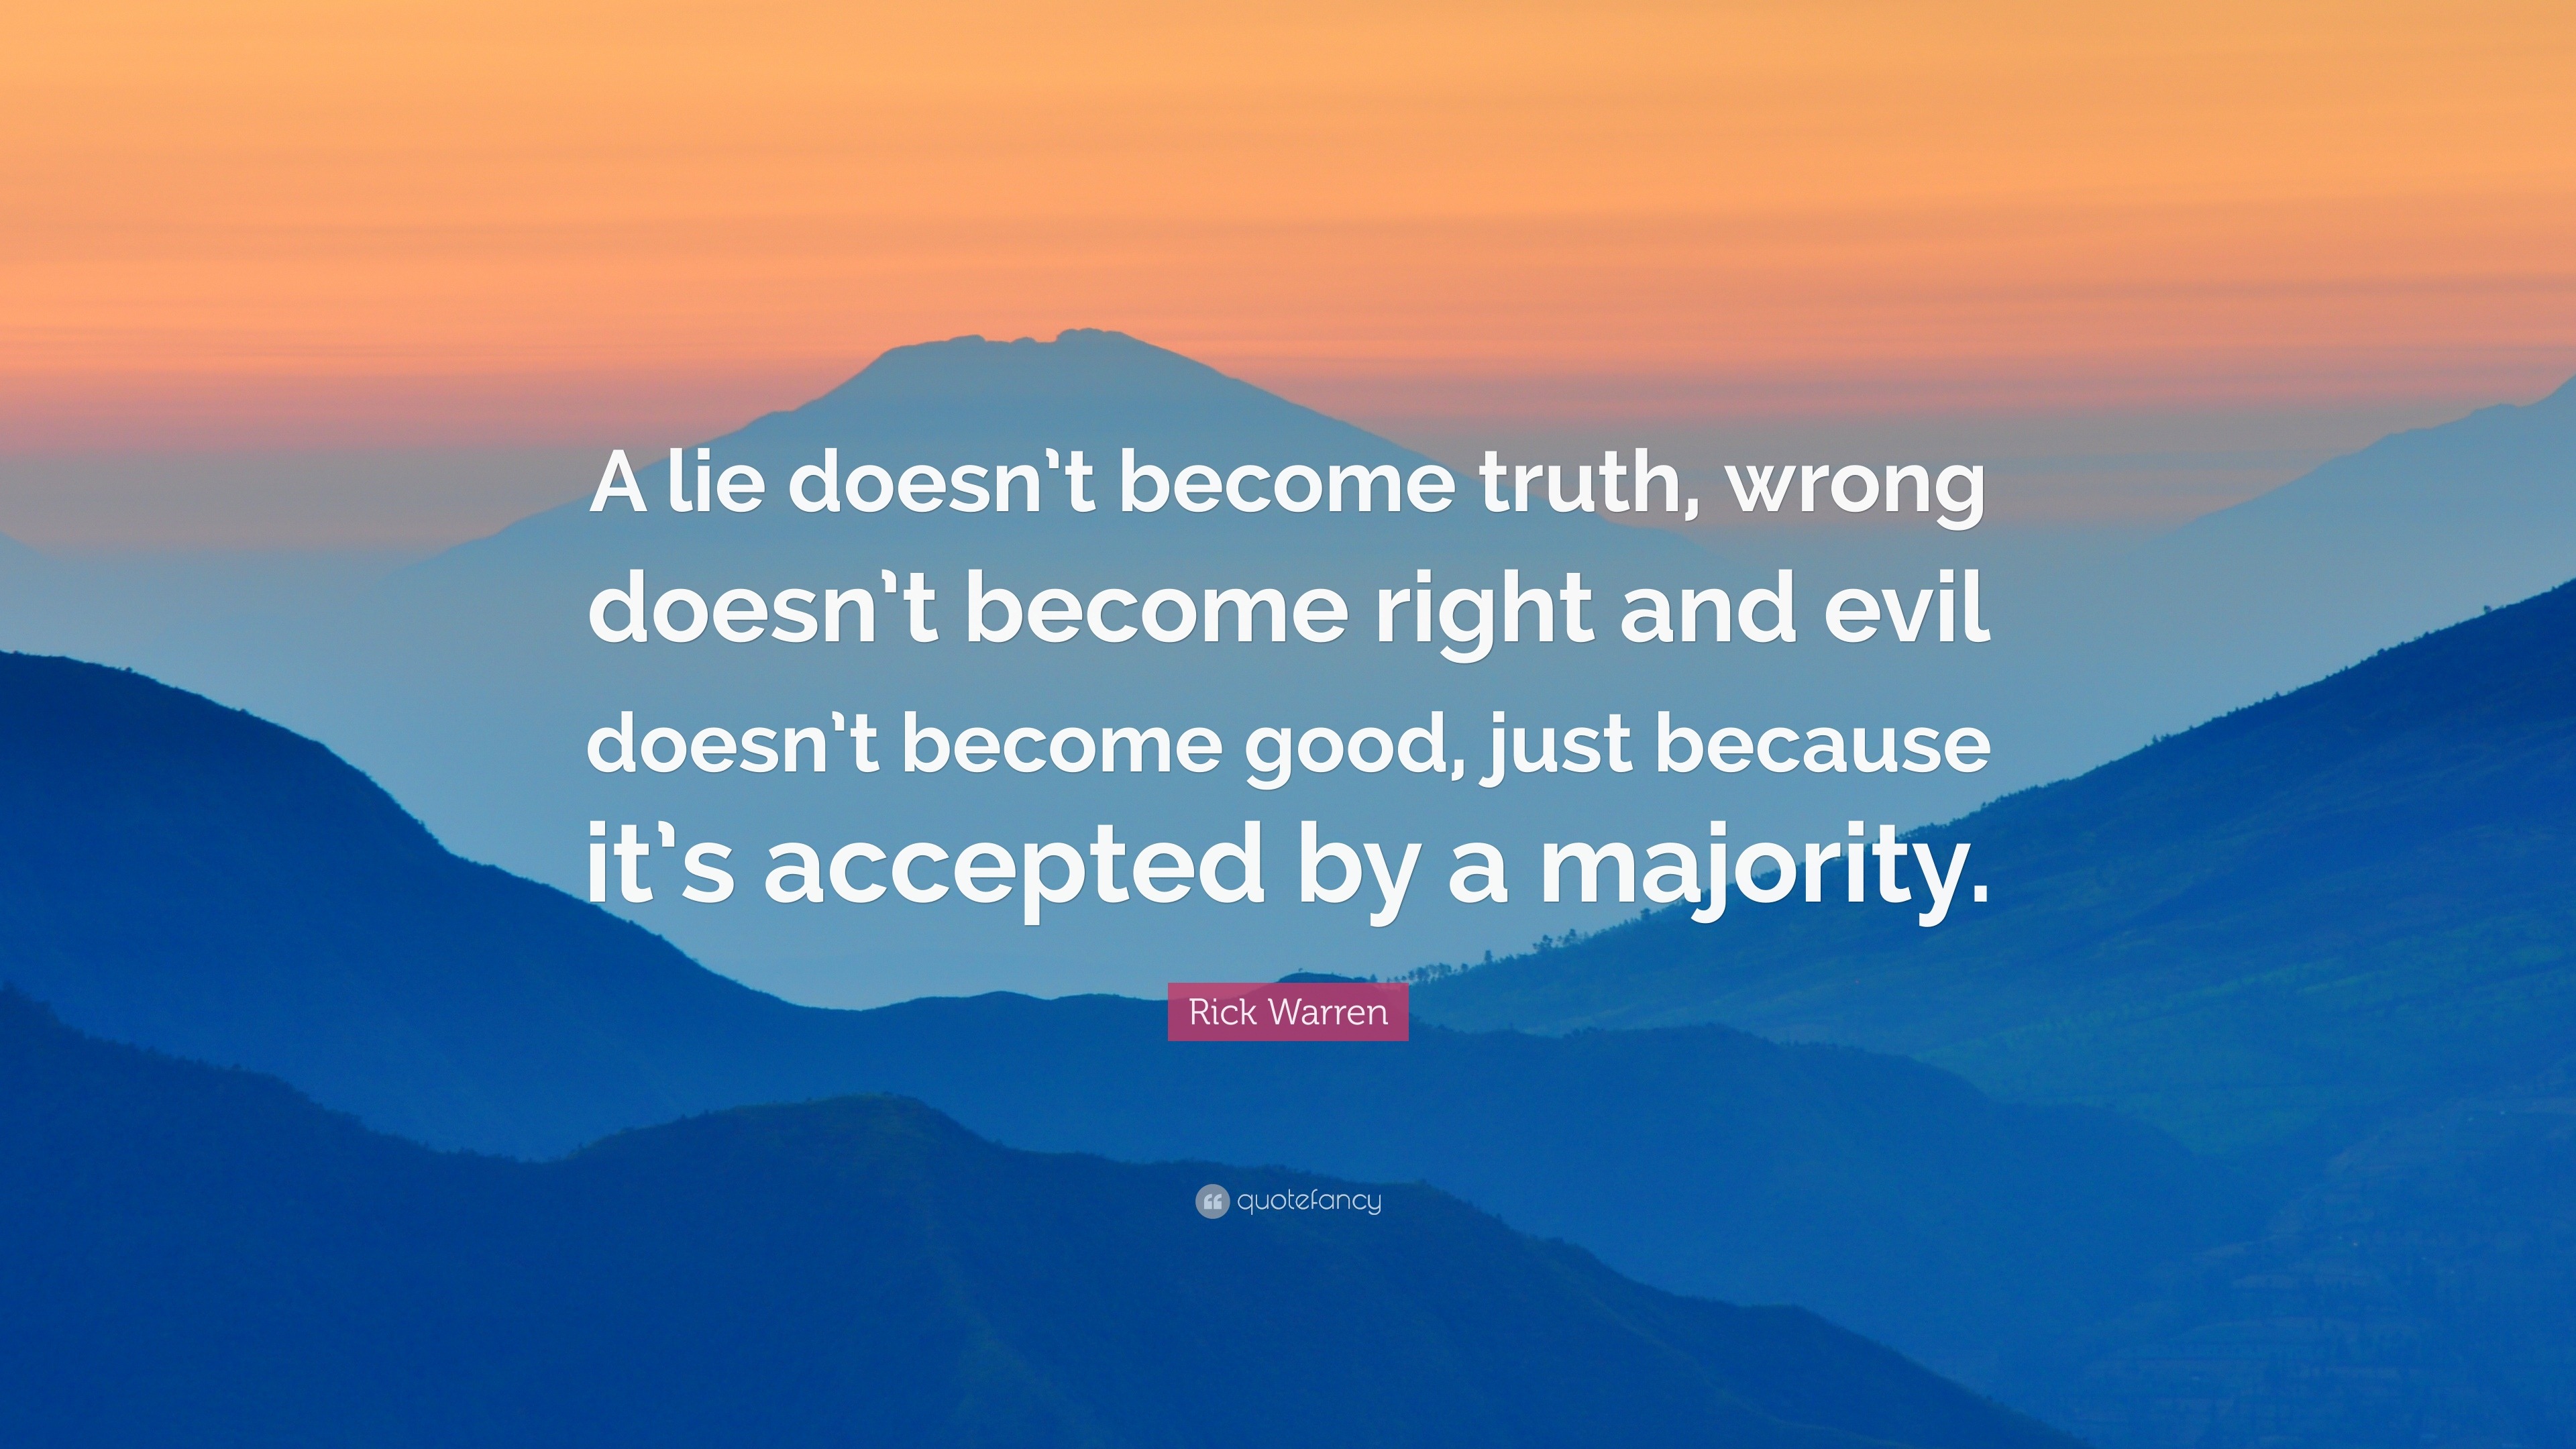 Rick Warren Quote A Lie Doesn T Become Truth Wrong Doesn T Become Right And Evil Doesn T Become Good Just Because It S Accepted By A Maj